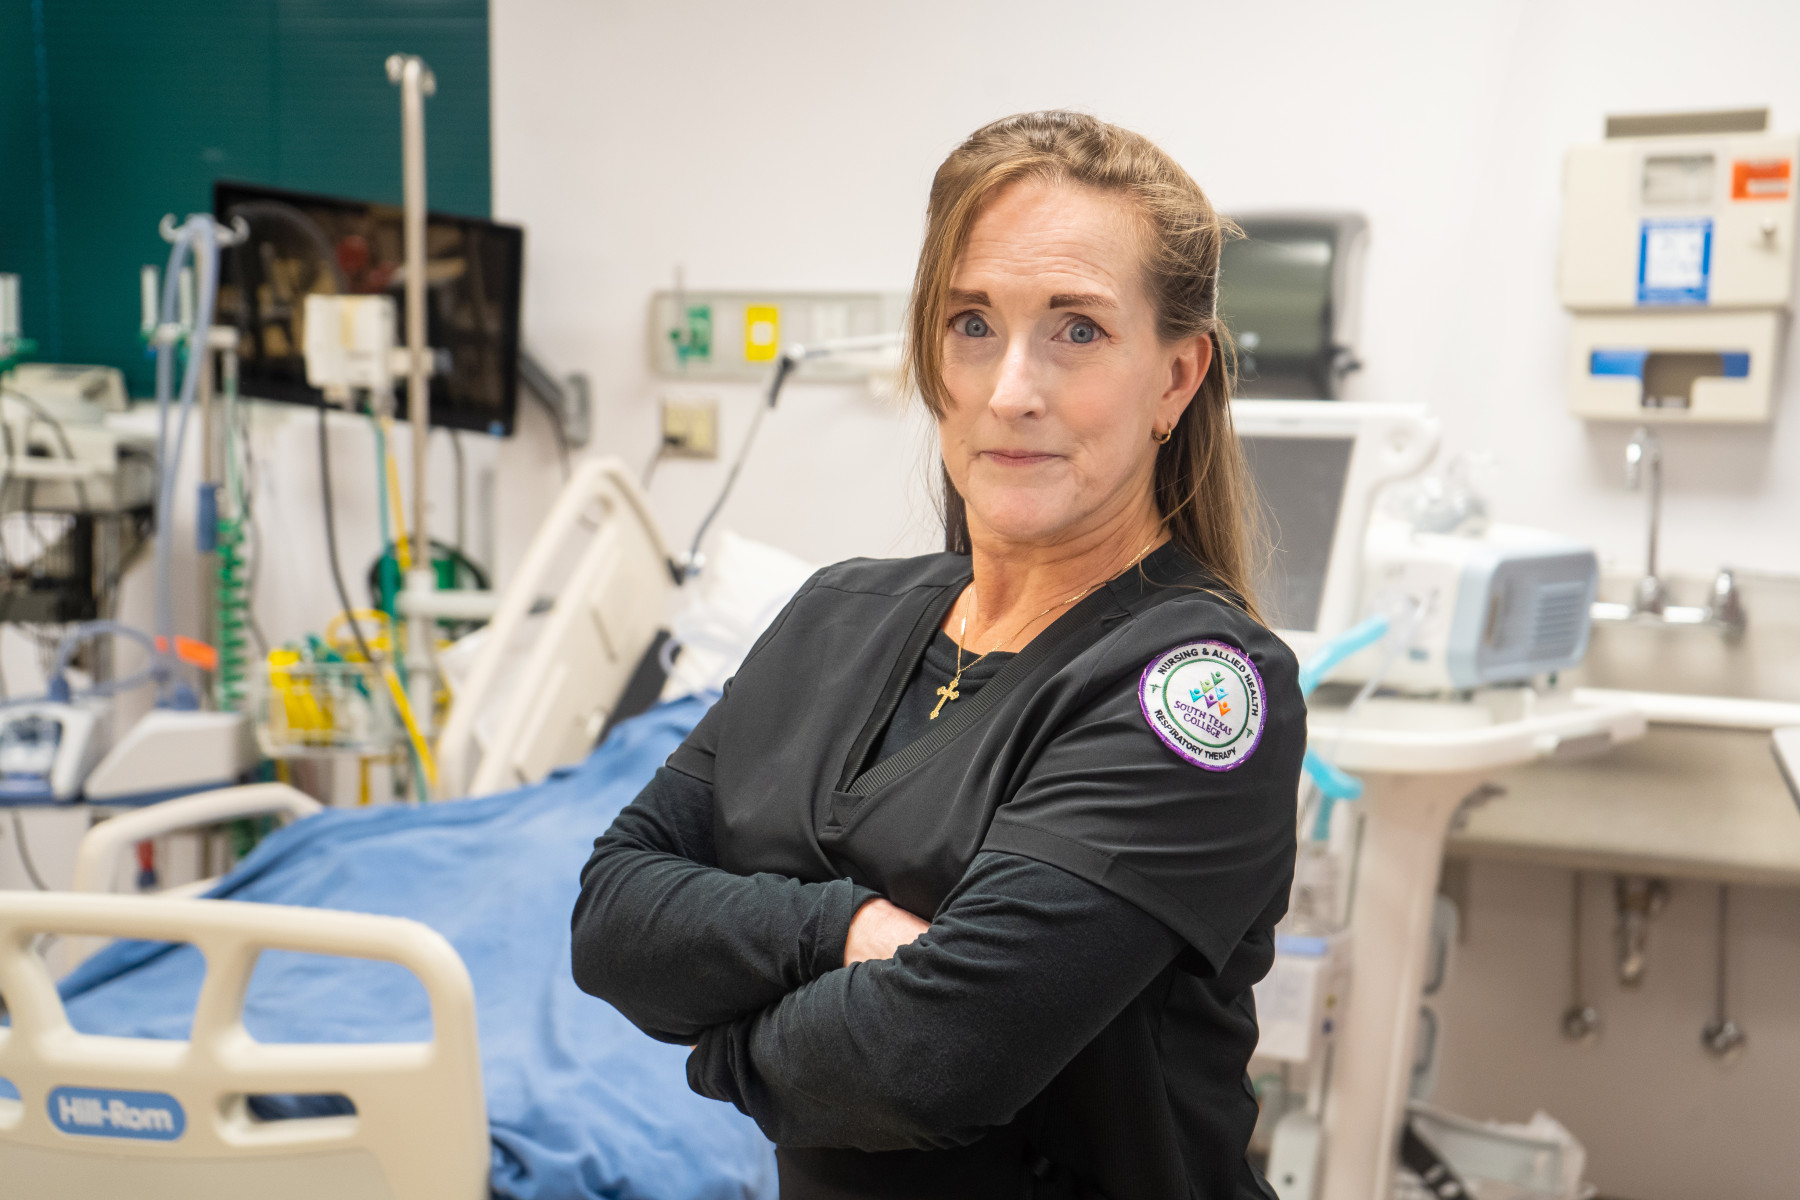 Dana Outon’s journey to Respiratory Therapy